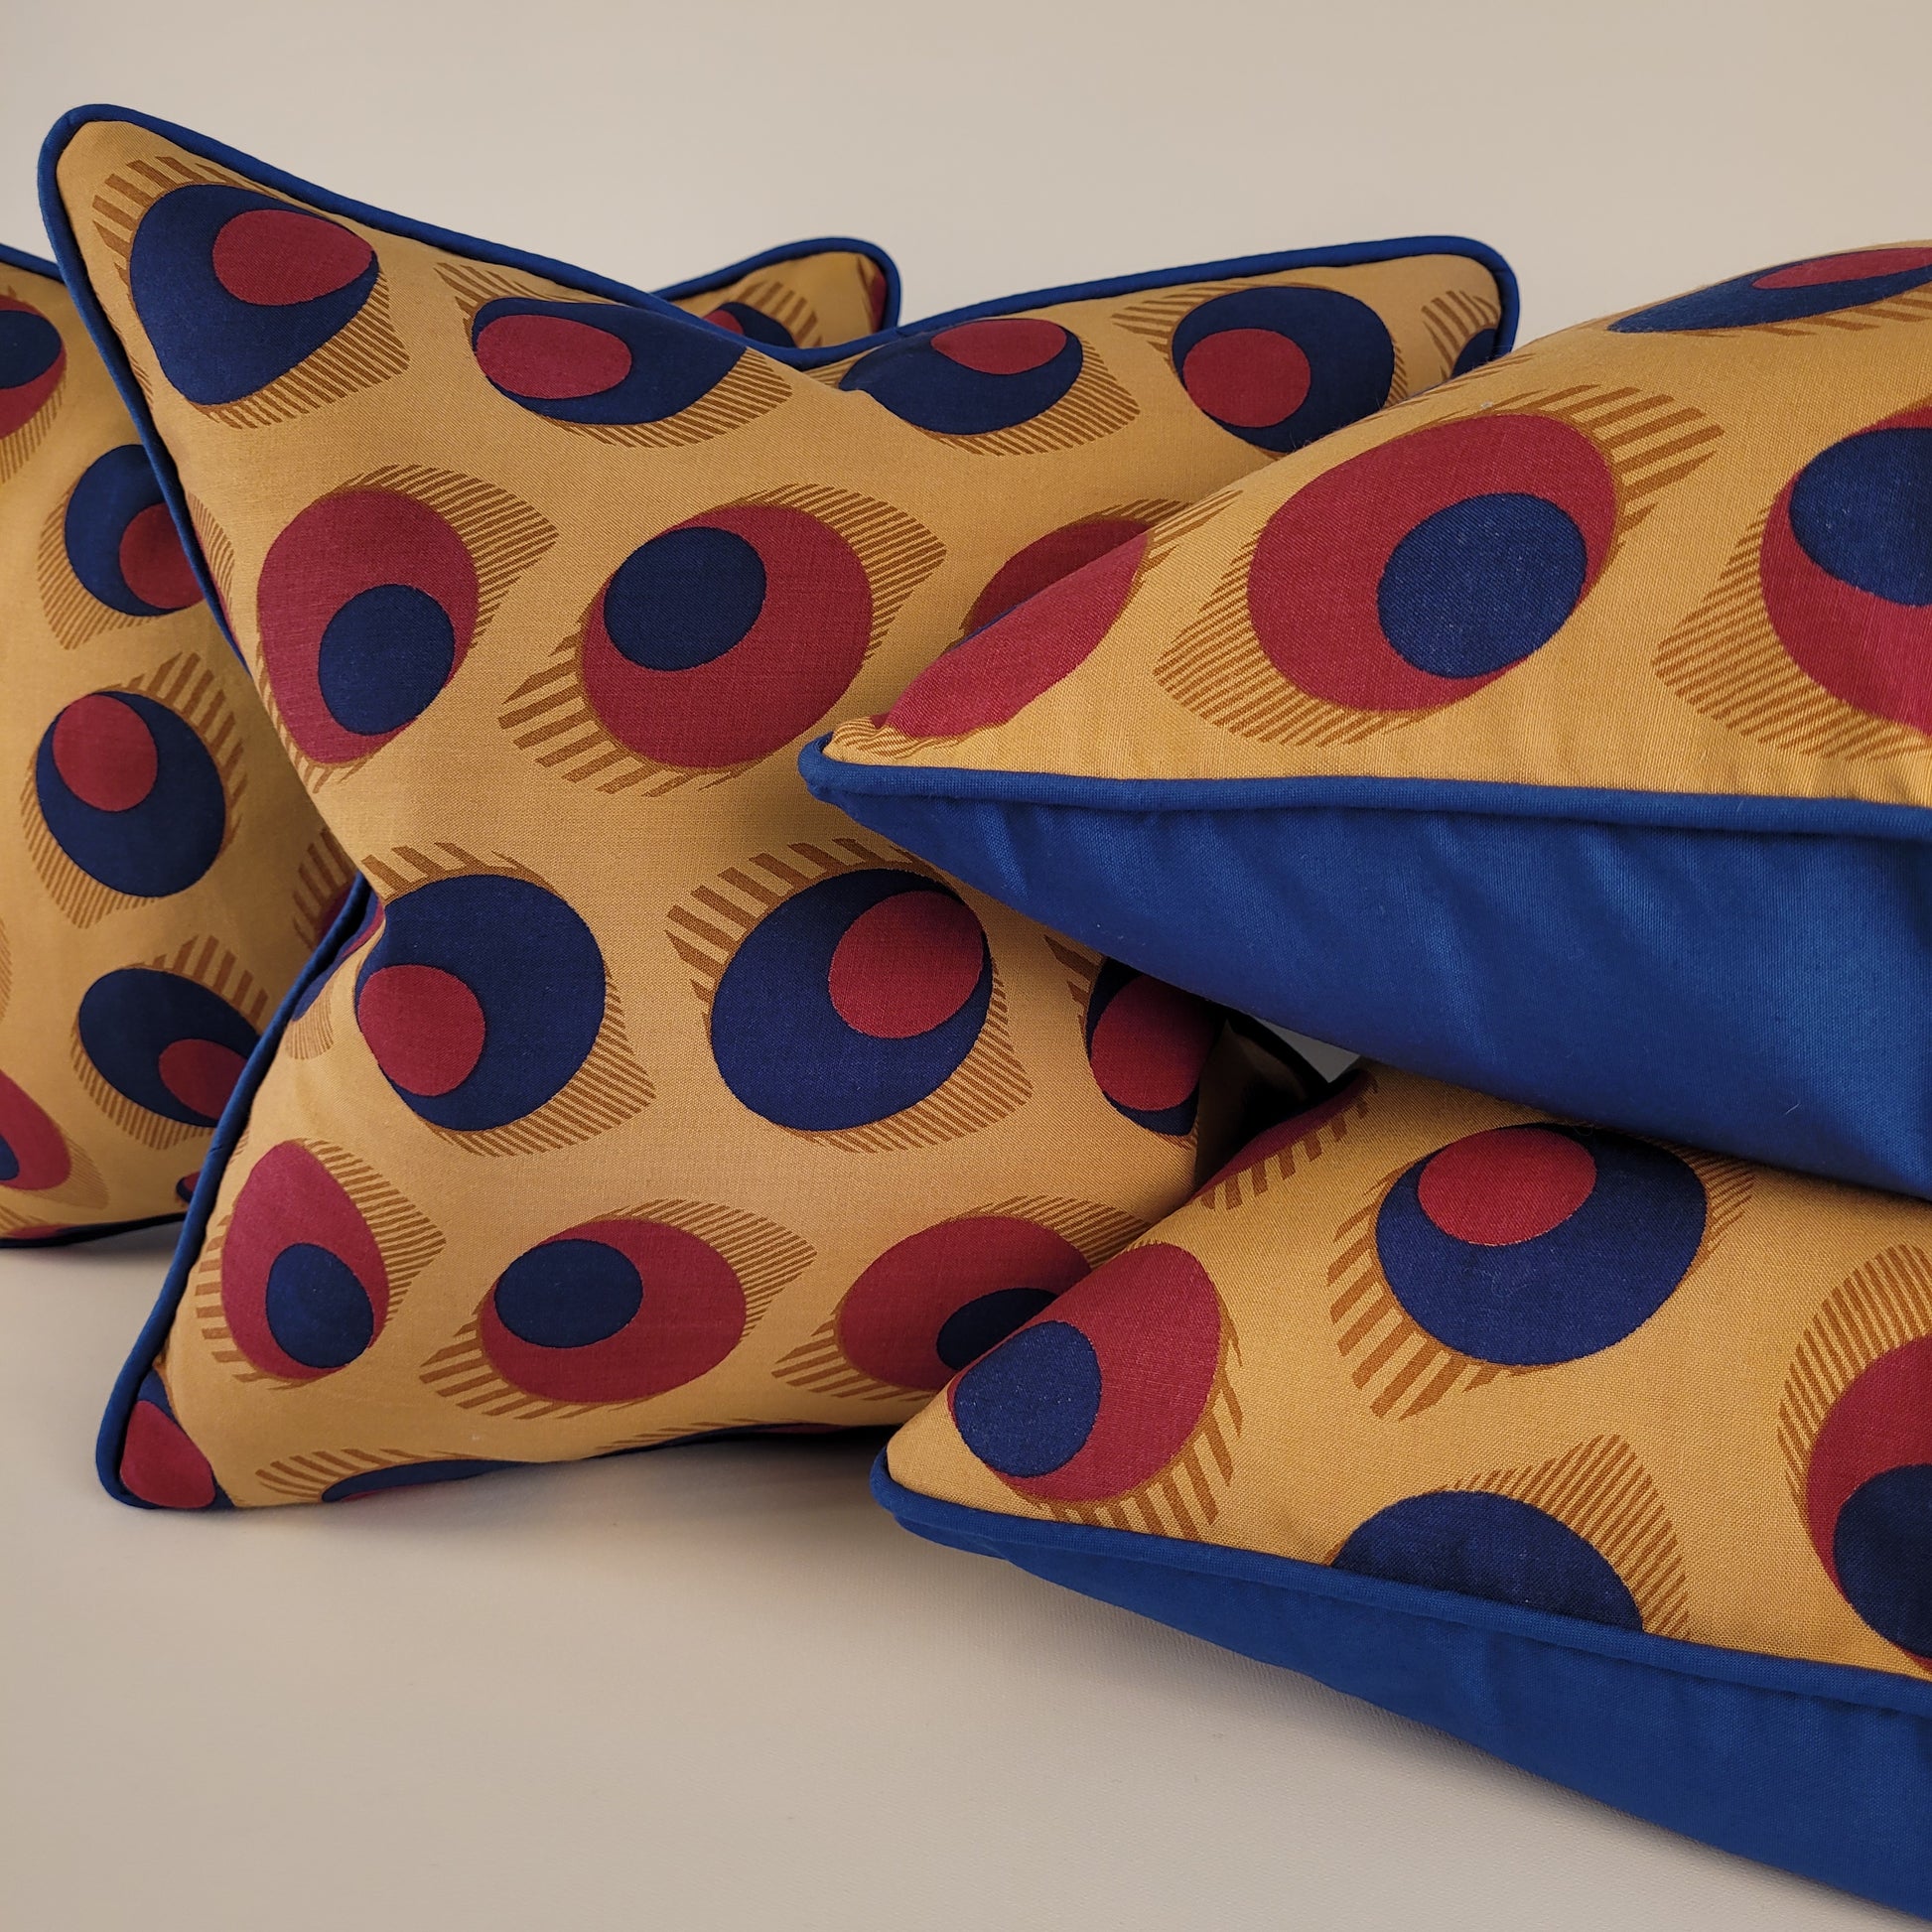 Vintage 1950s Blue, Purple and Brown "Olive" or "Eye" Pillow with Welt 16" handmade